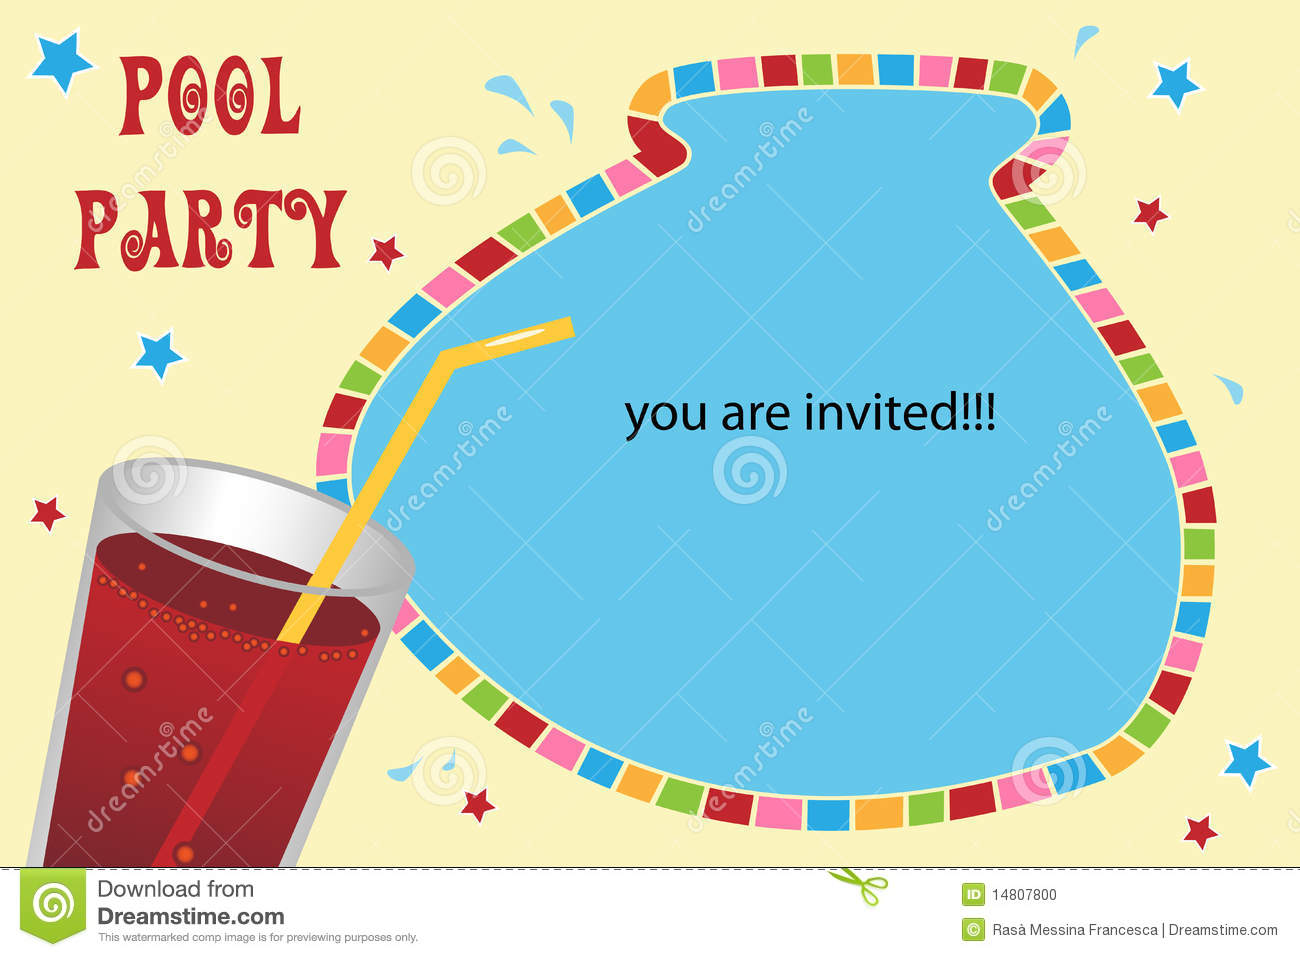 Illustration Of A Pool Party Invitation Card Eps File Available